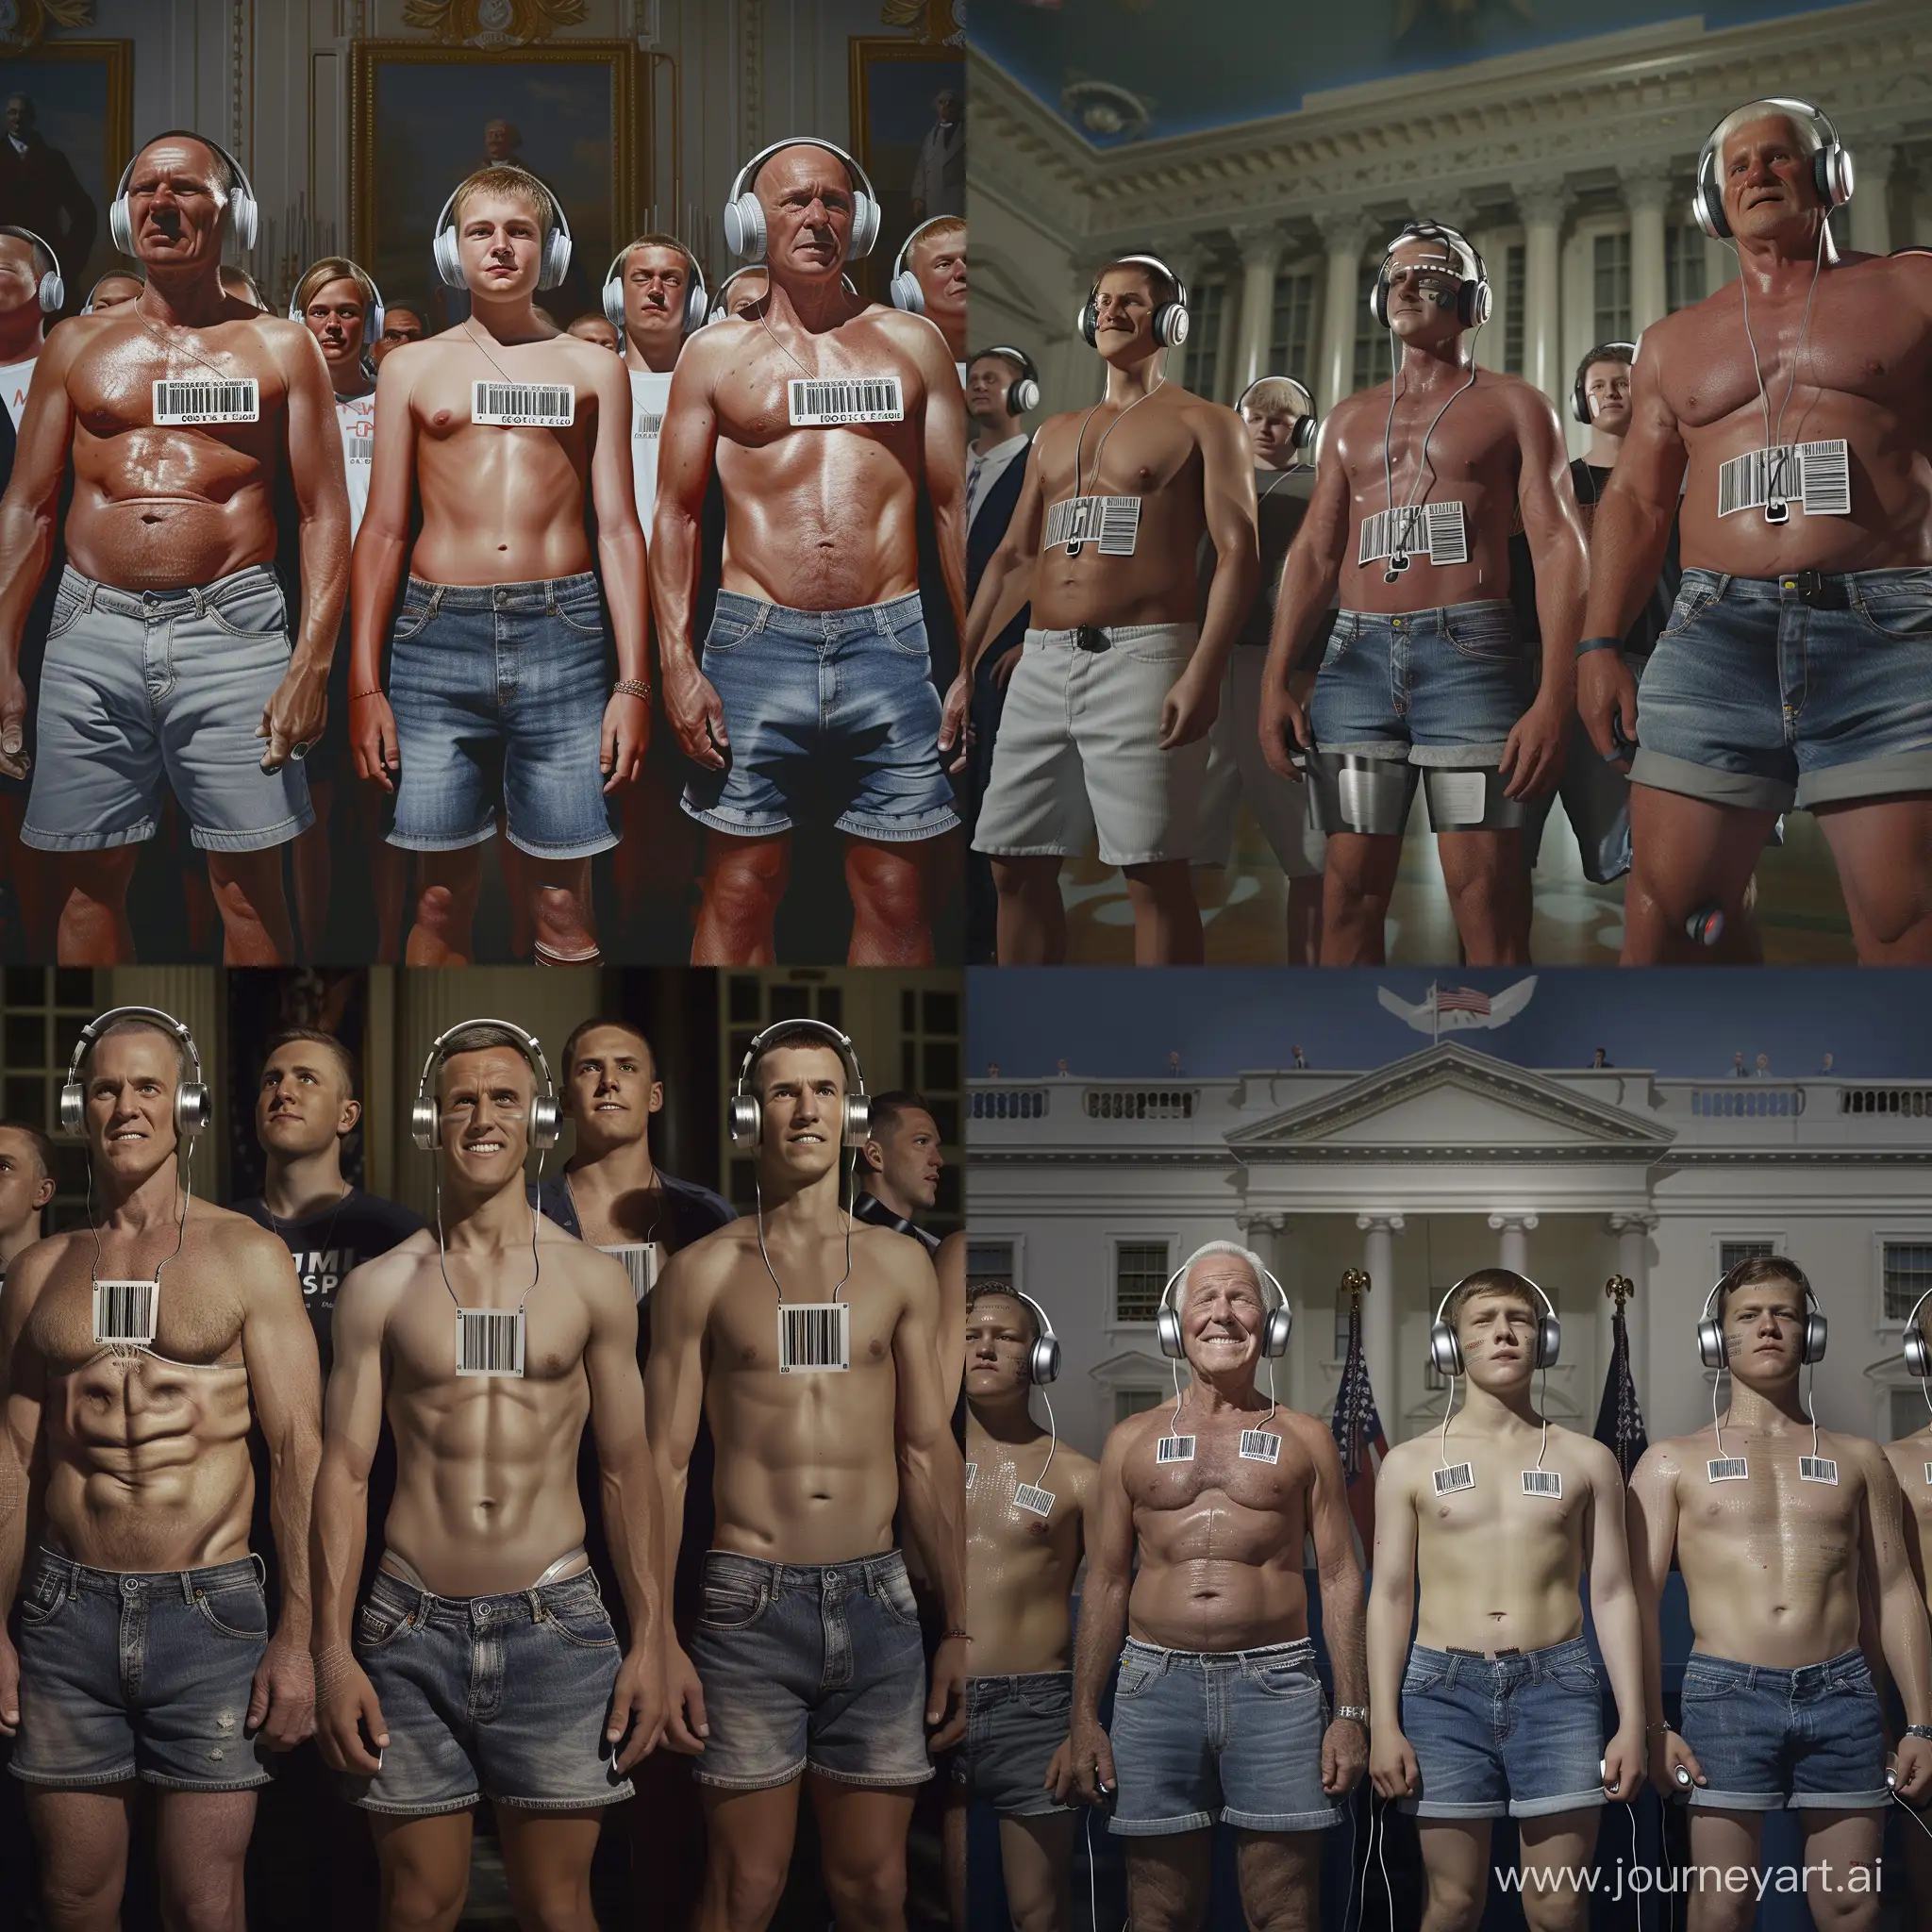 Silver-Headphonewearing-Men-and-Boys-in-Denim-Shorts-at-White-House-Press-Conference